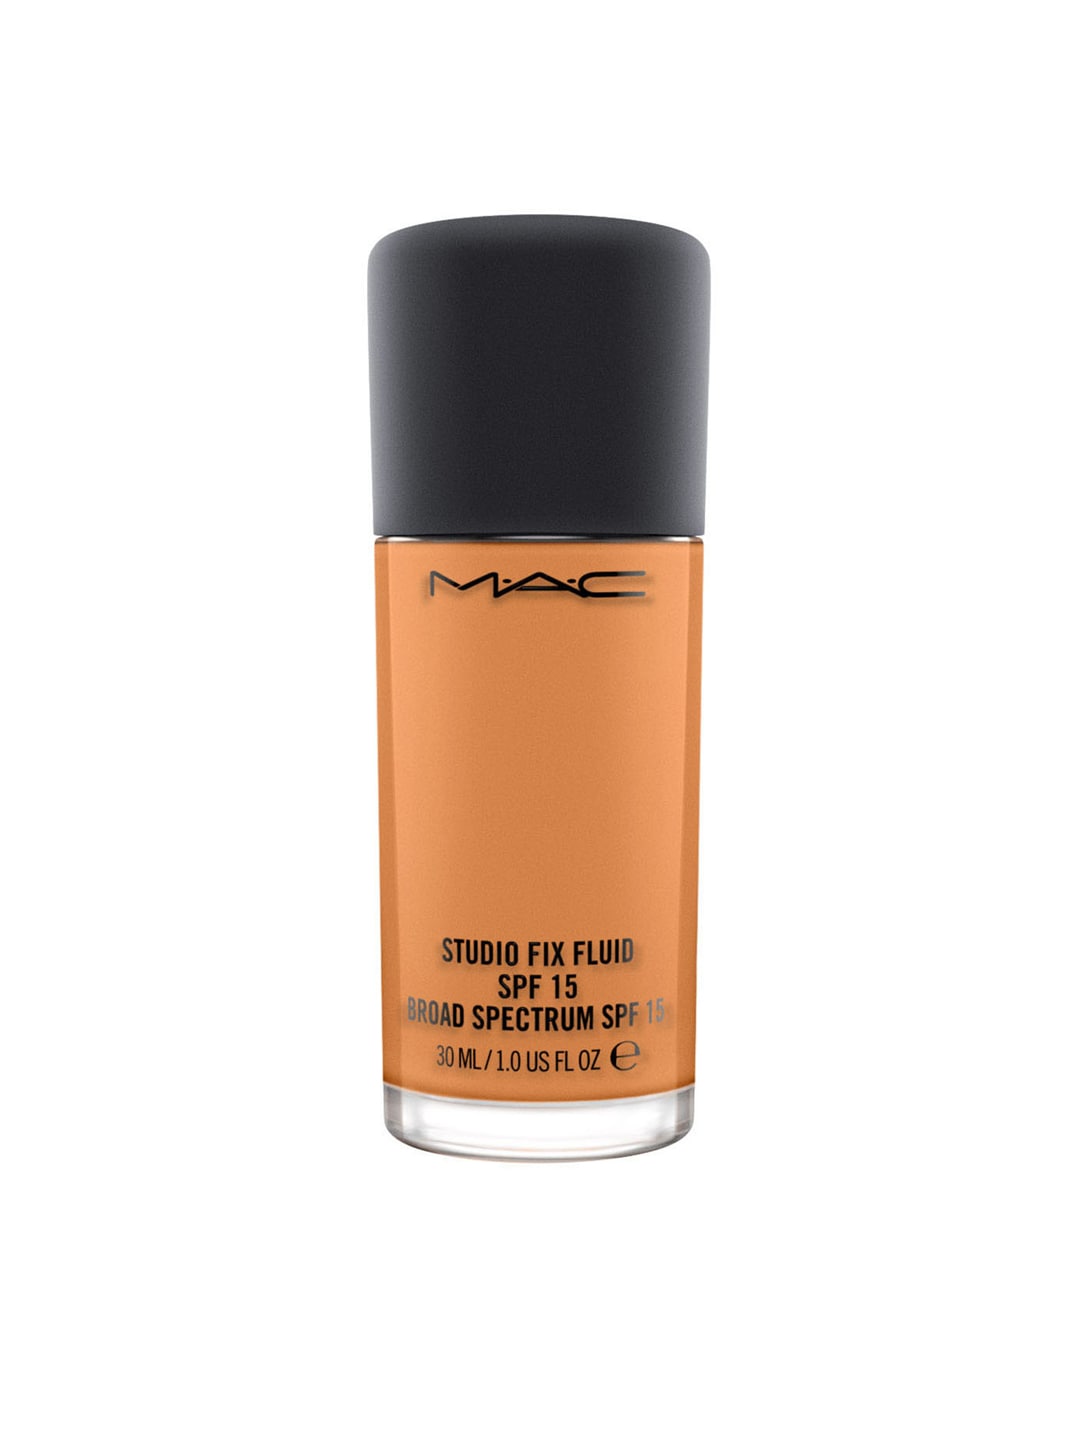 M.A.C Studio Fix Fluid Foundation with SPF 15 - NC46 30ml Price in India